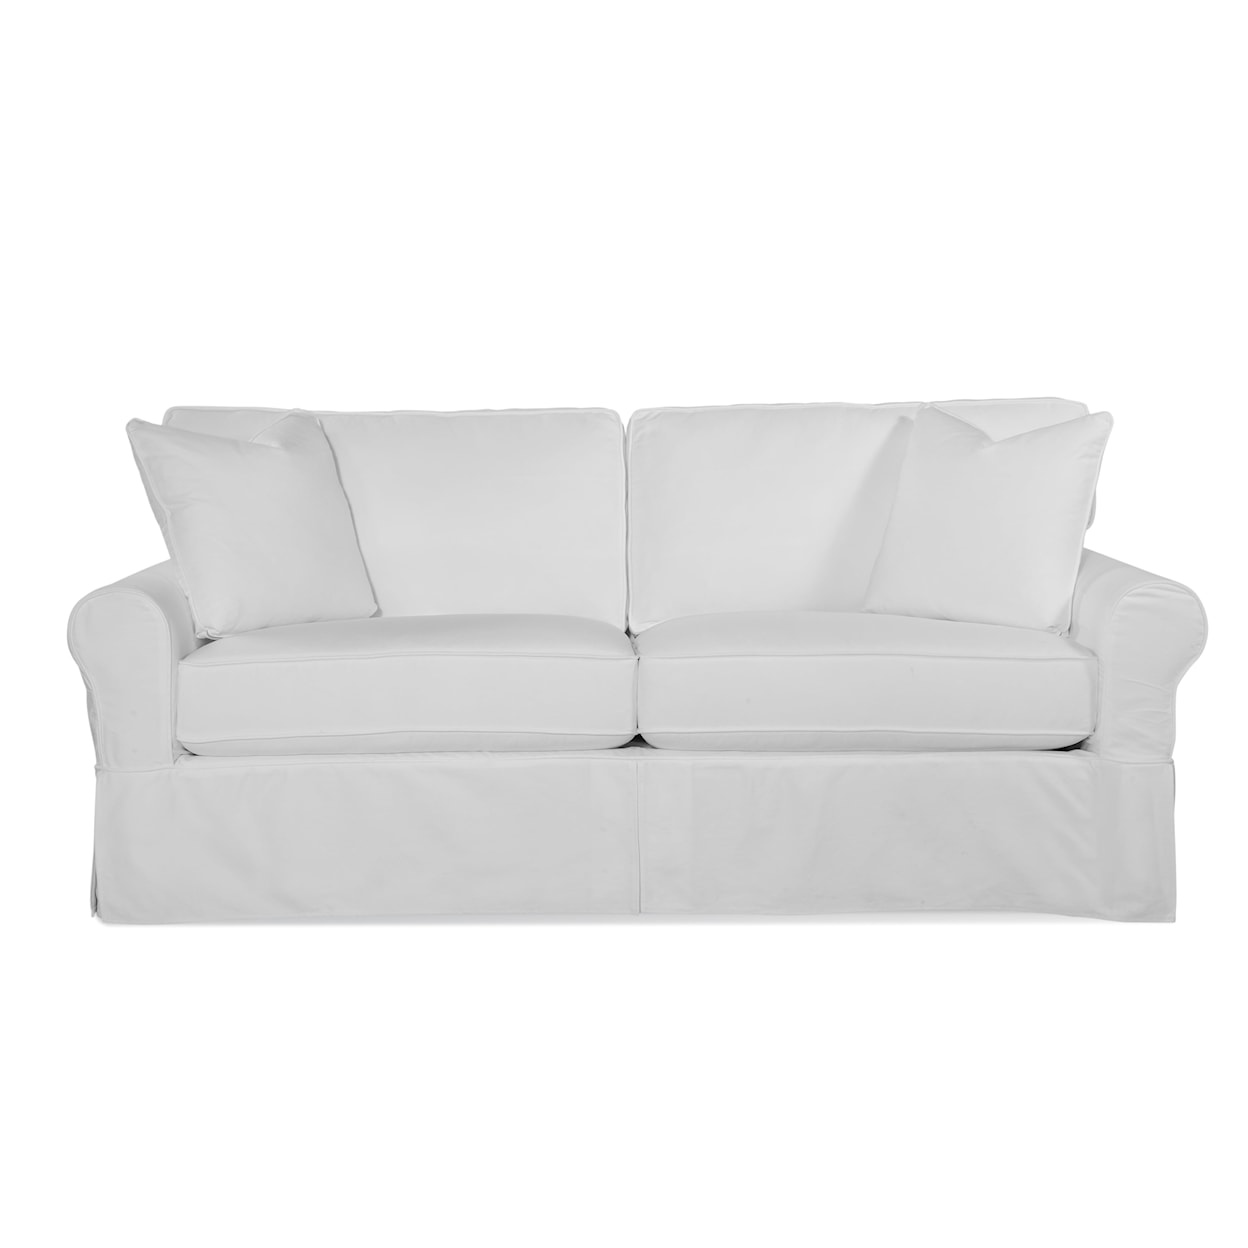 Braxton Culler Bedford Bedford 2 over 2 Loft Sofa with Slipcover